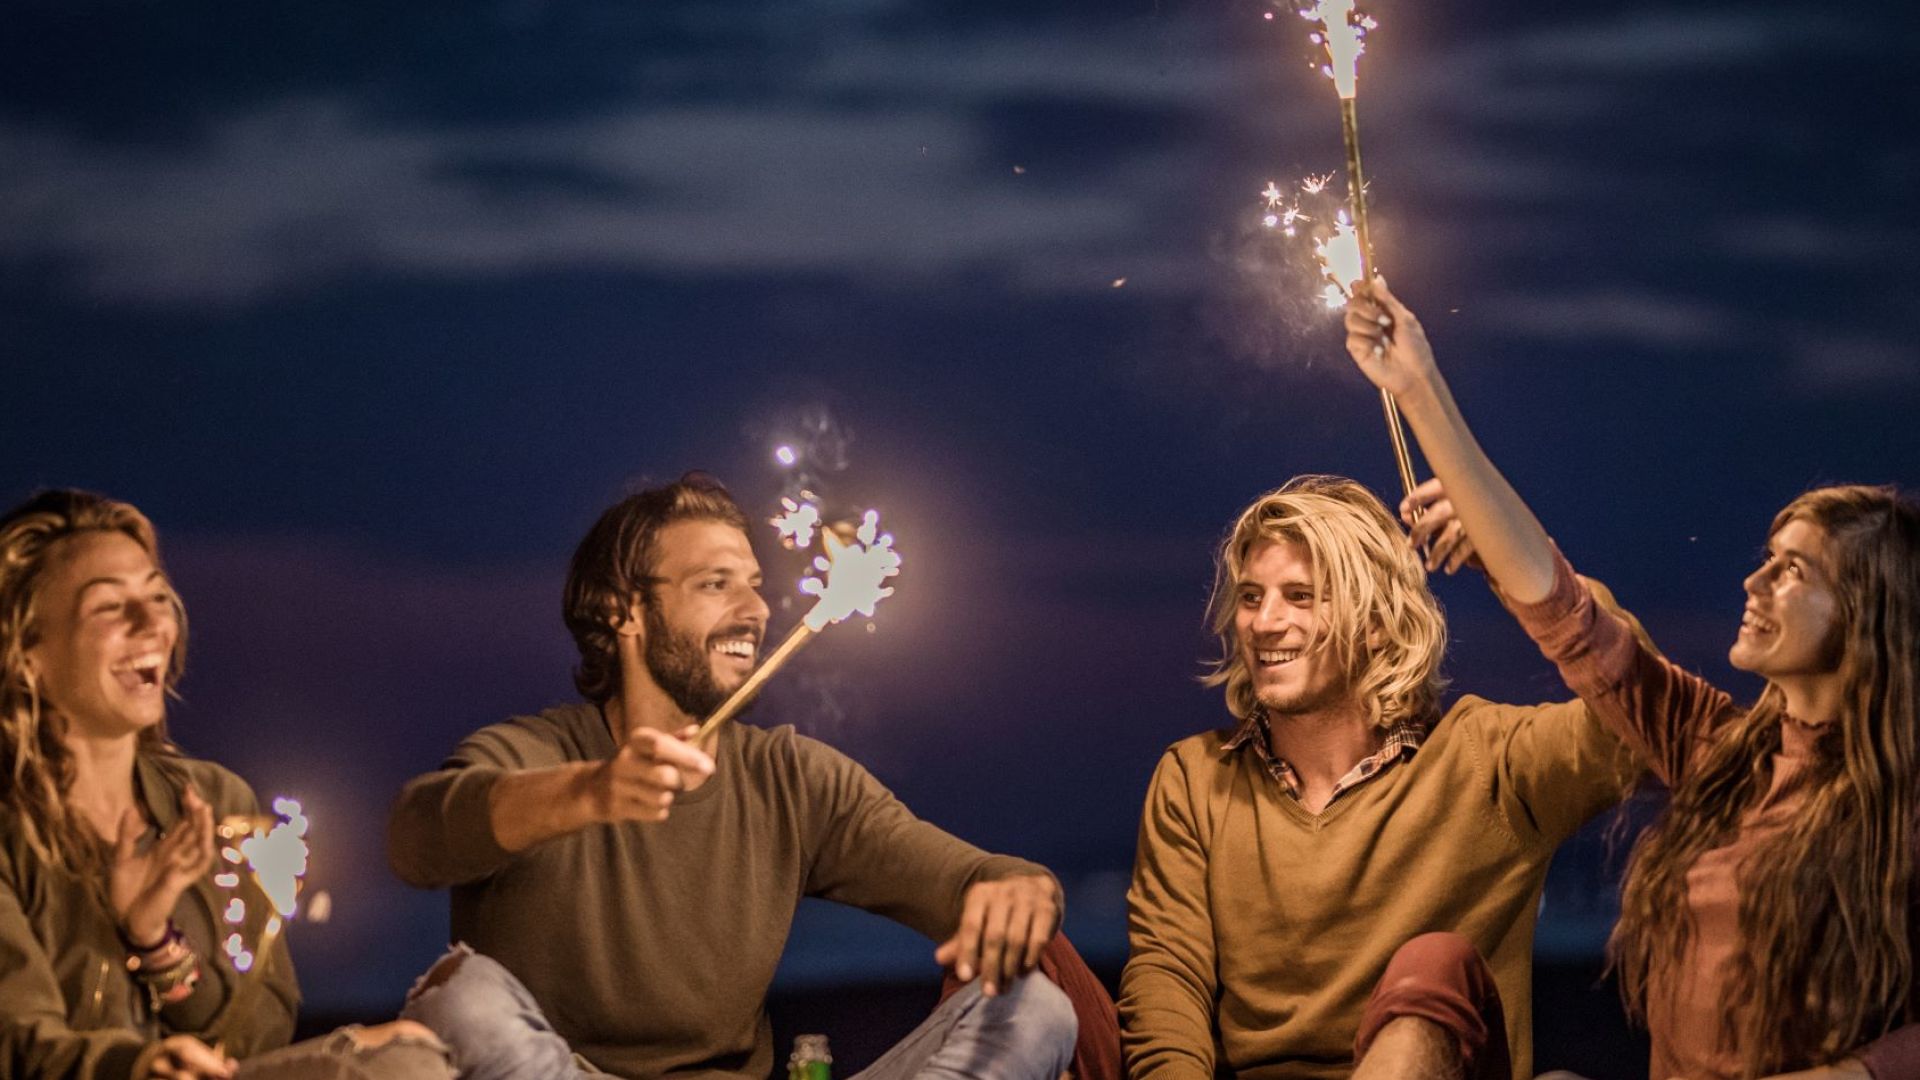 A Group Of People Sitting On A Beach With Fireworks In The Sky